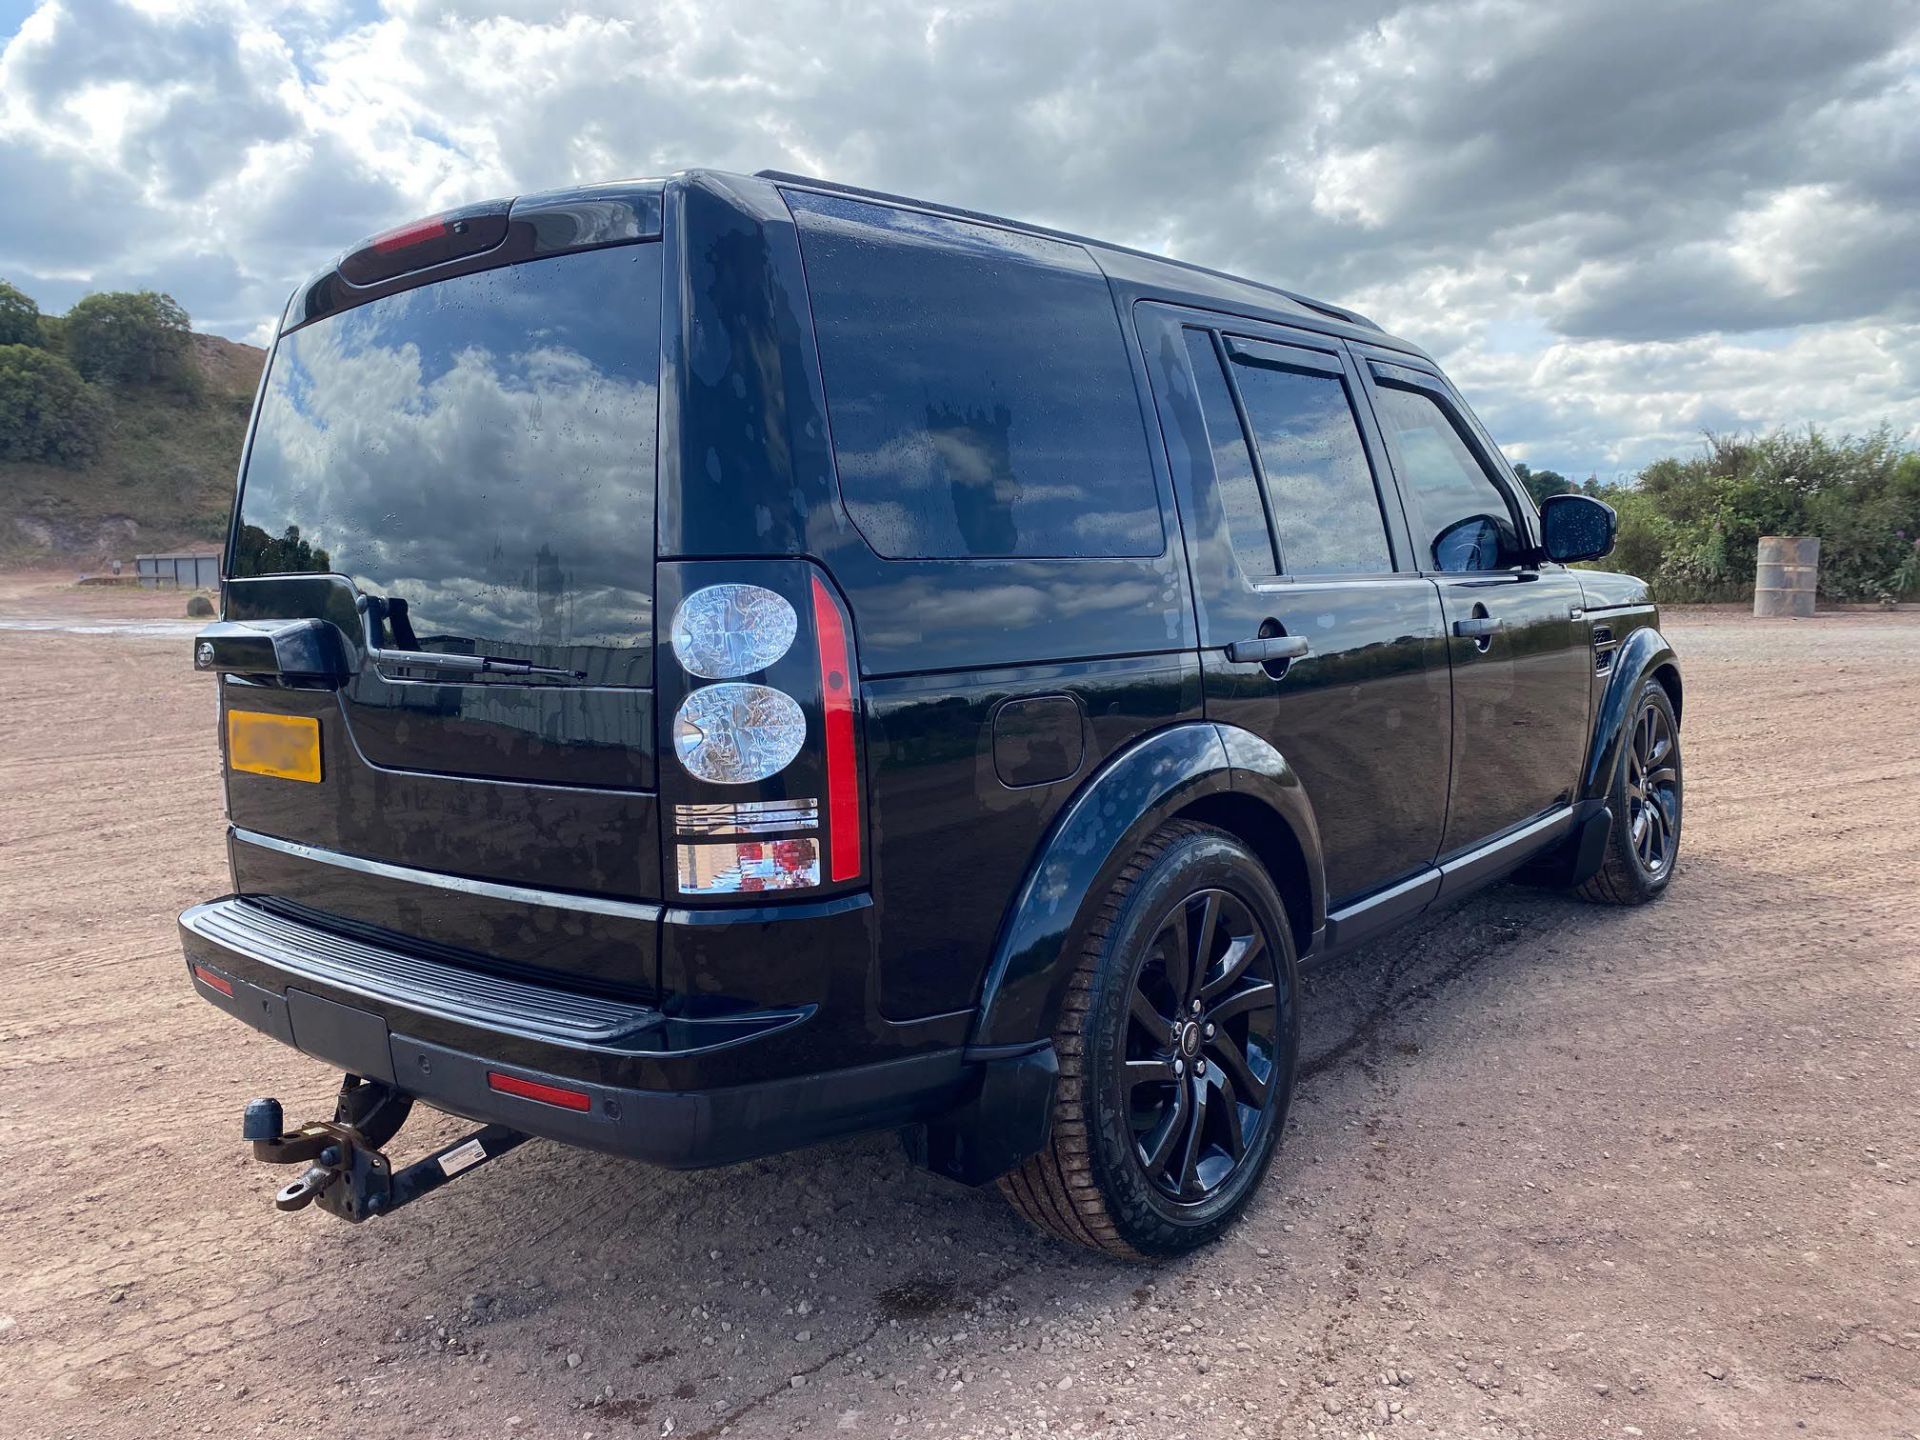 2015 LAND ROVER DISCOVERY XS SDV6 AUTO BLACK CONVERTED COMMERCIAL – WITH REAR SEAT CONVERSION - Image 4 of 13